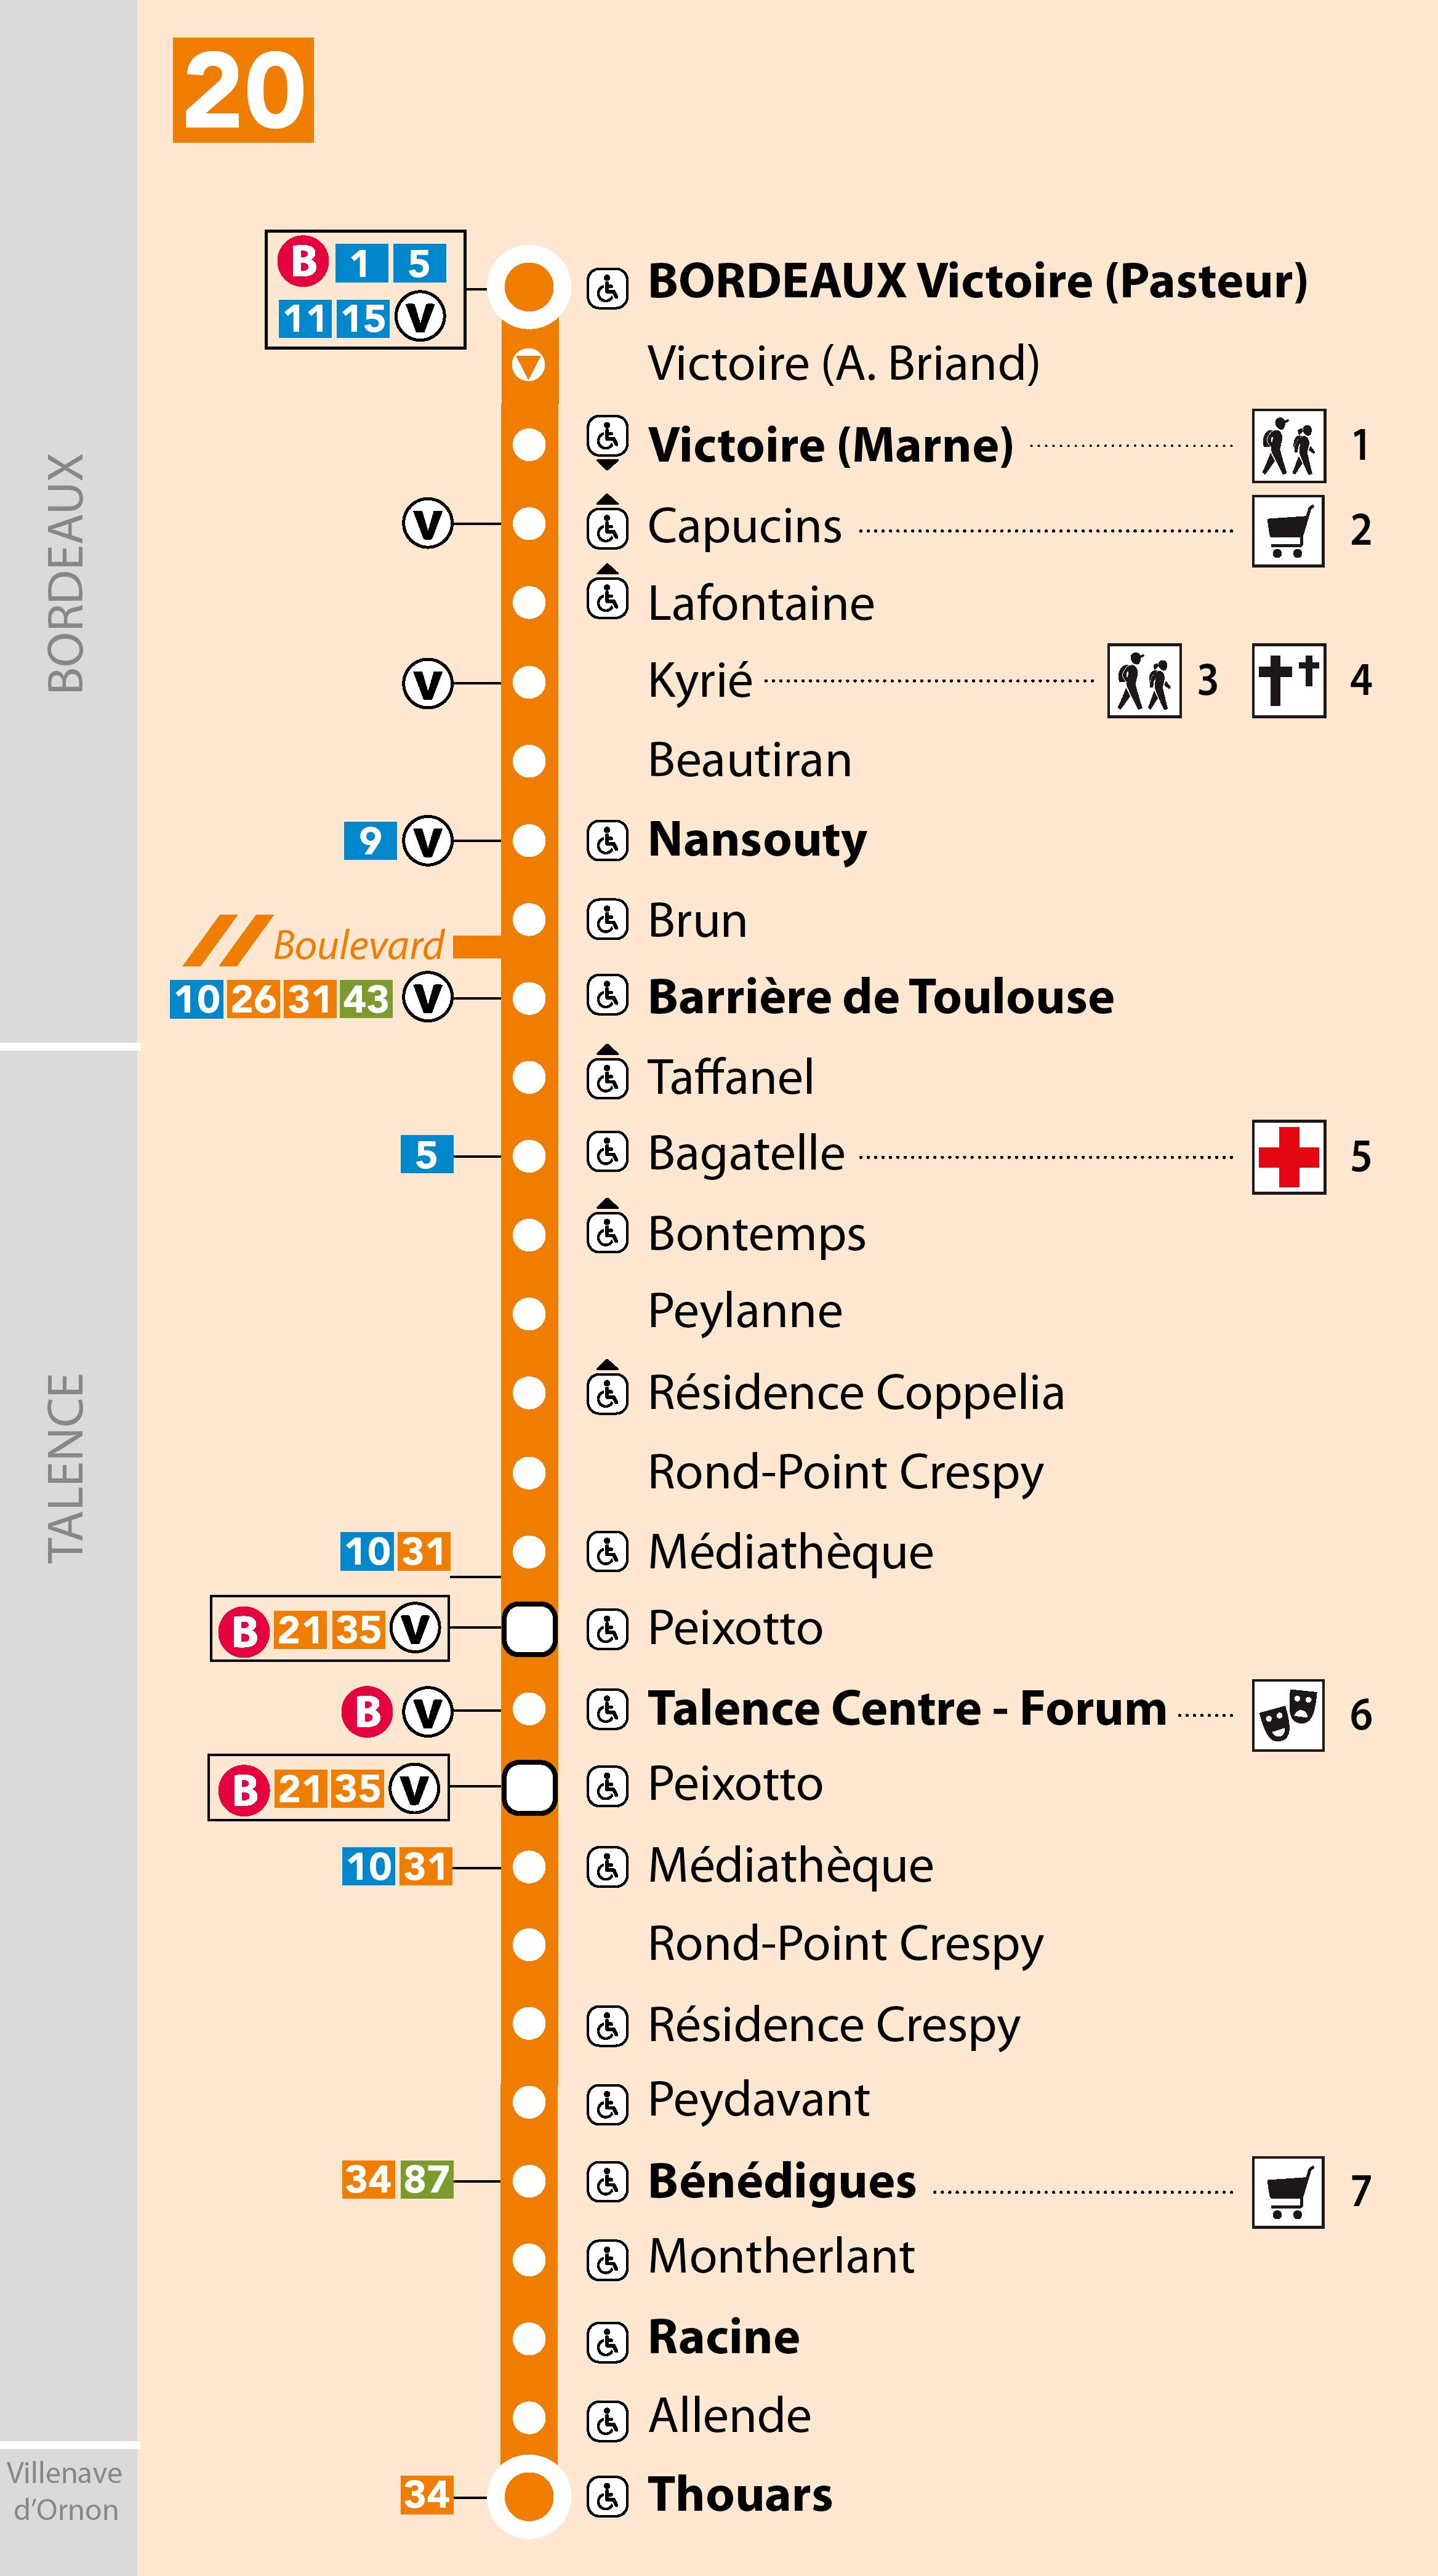 Route diagram of bus 20 on the network of Bordeaux. Bicycle hire connections, transfers and sites of interest are shown, as is accessibility information (since some stops are inaccessible to wheelchair users). The route is depicted as a straight vertical line